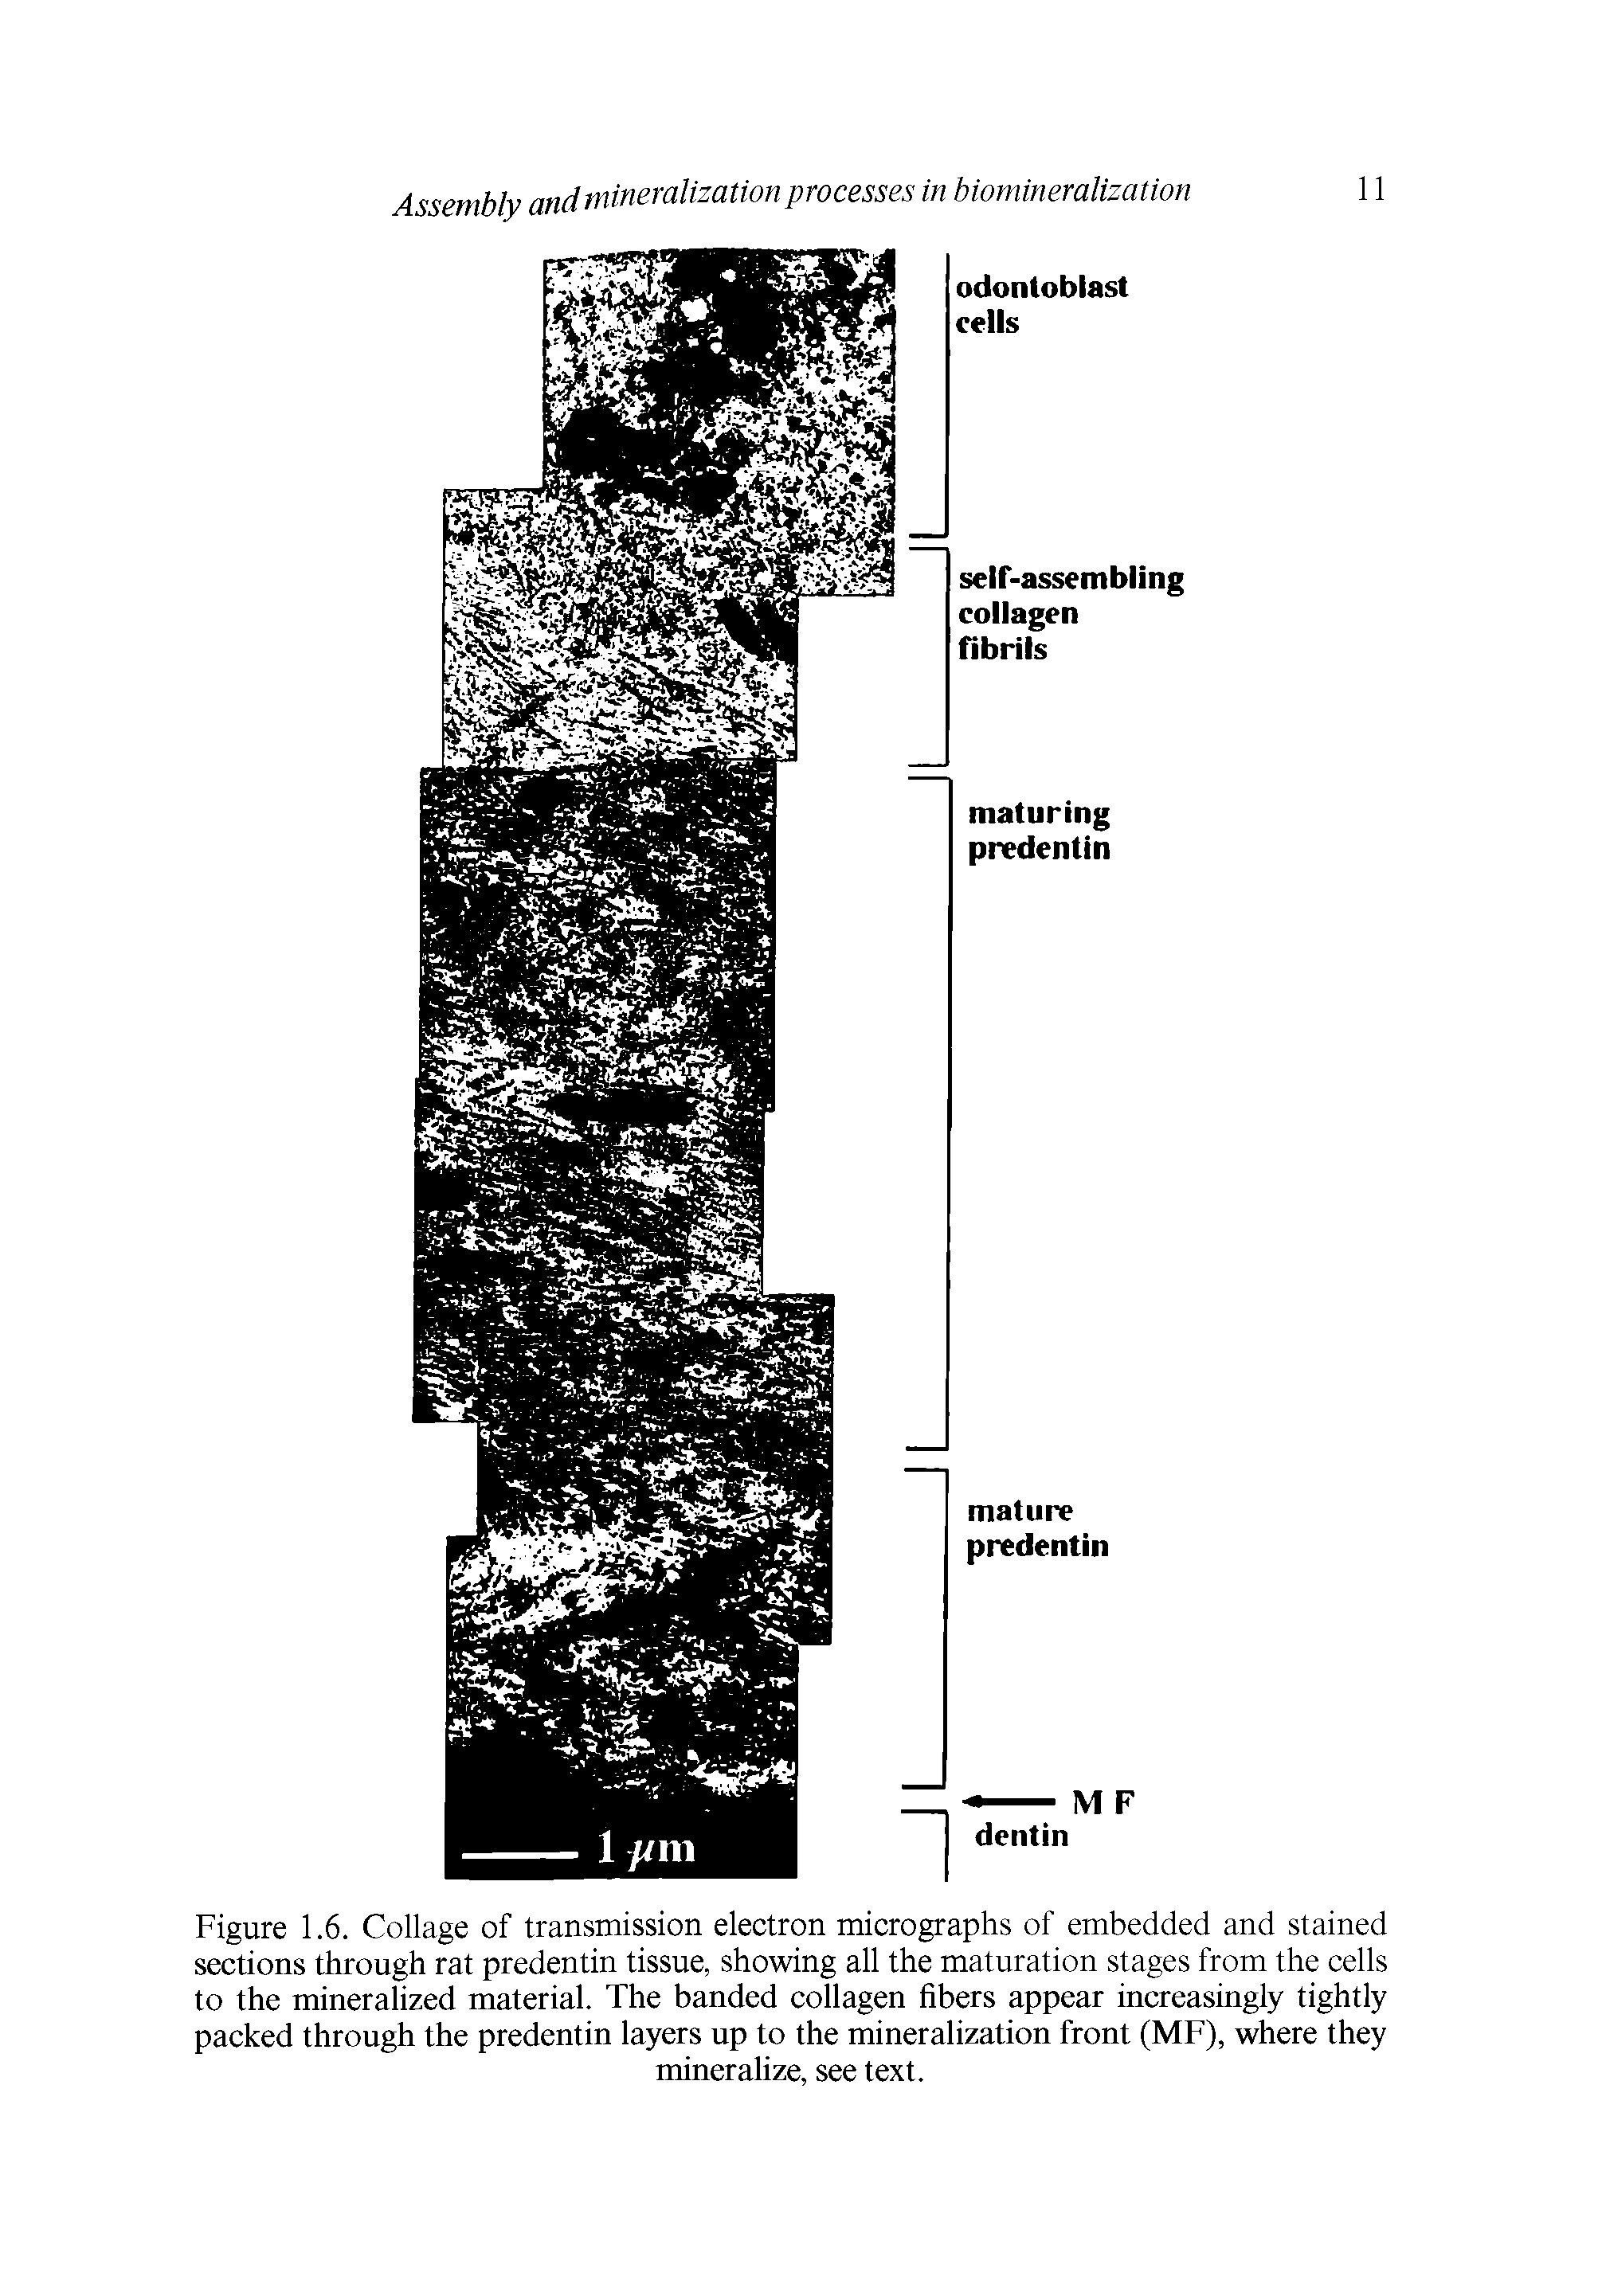 Figure 1.6. Collage of transmission electron micrographs of embedded and stained sections through rat predentin tissue, showing all the maturation stages from the cells to the mineralized material. The banded collagen fibers appear increasingly tightly packed through the predentin layers up to the mineralization front (MF), where they...